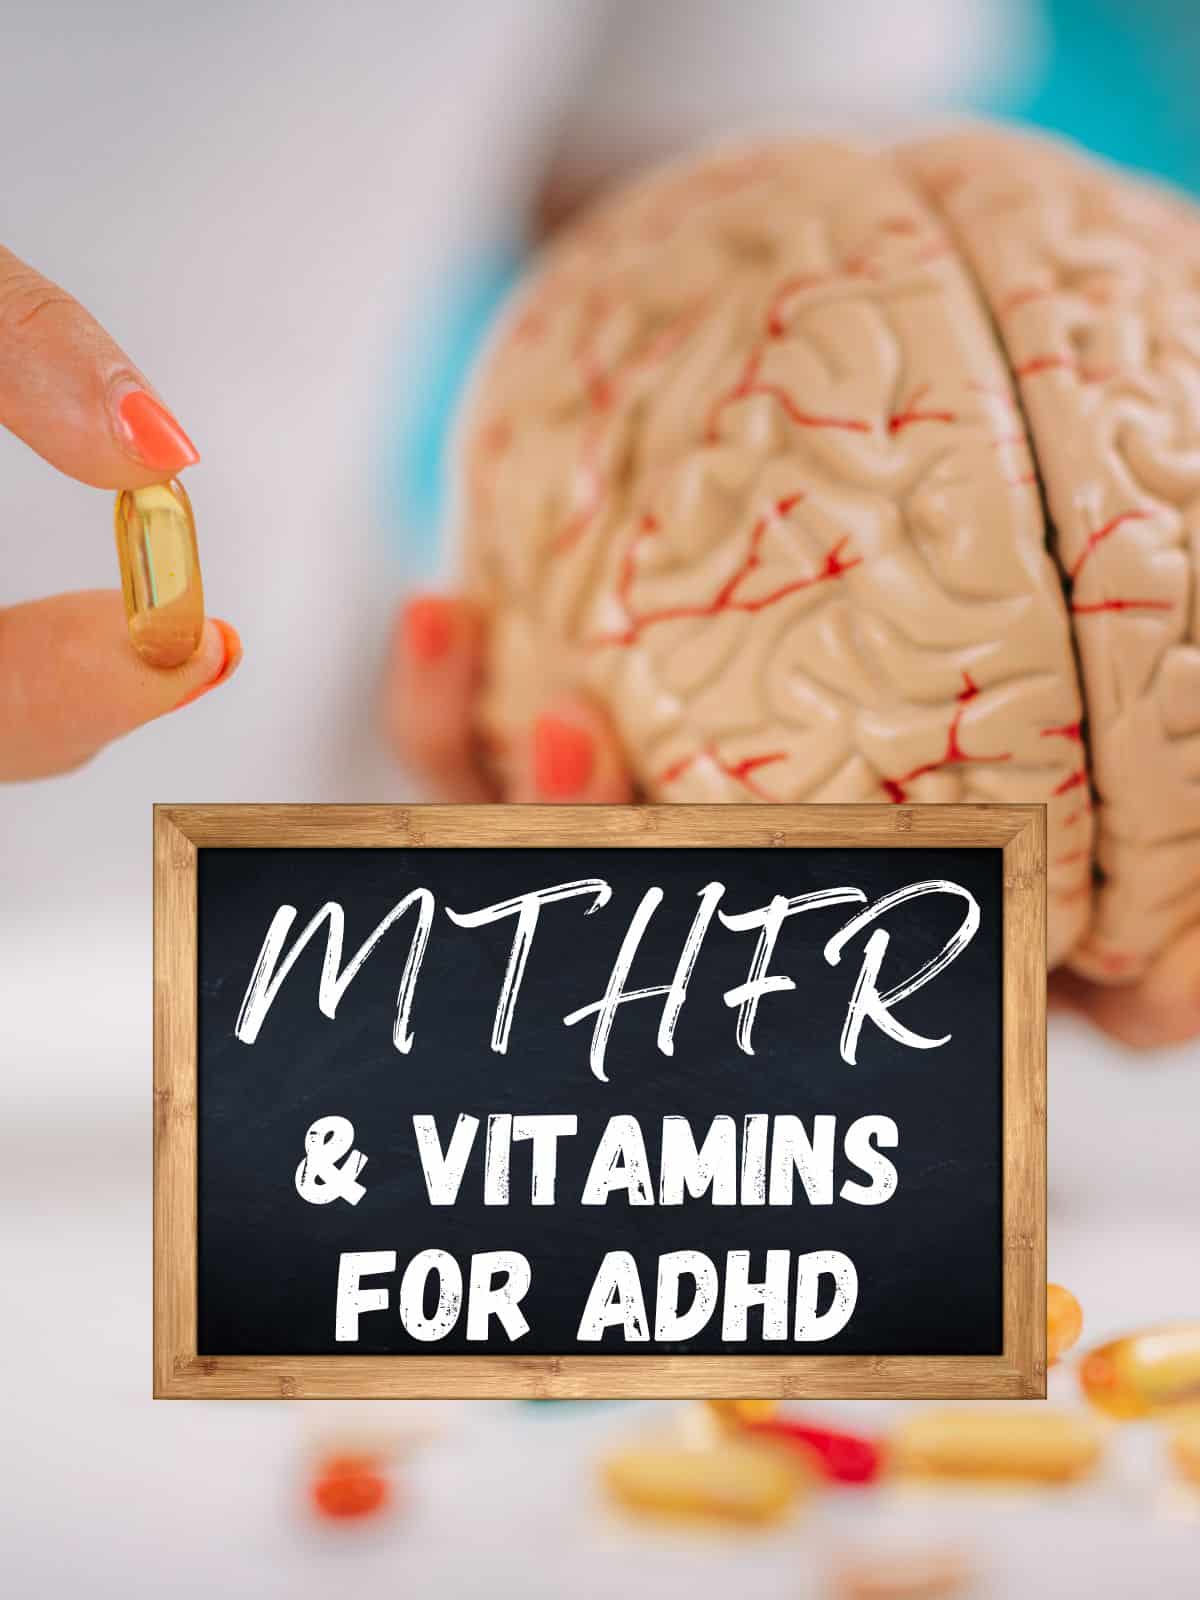 A person's hands holding a fake brain and a methylated vitamin with the text "MTHFR & Vitamins for ADHD."